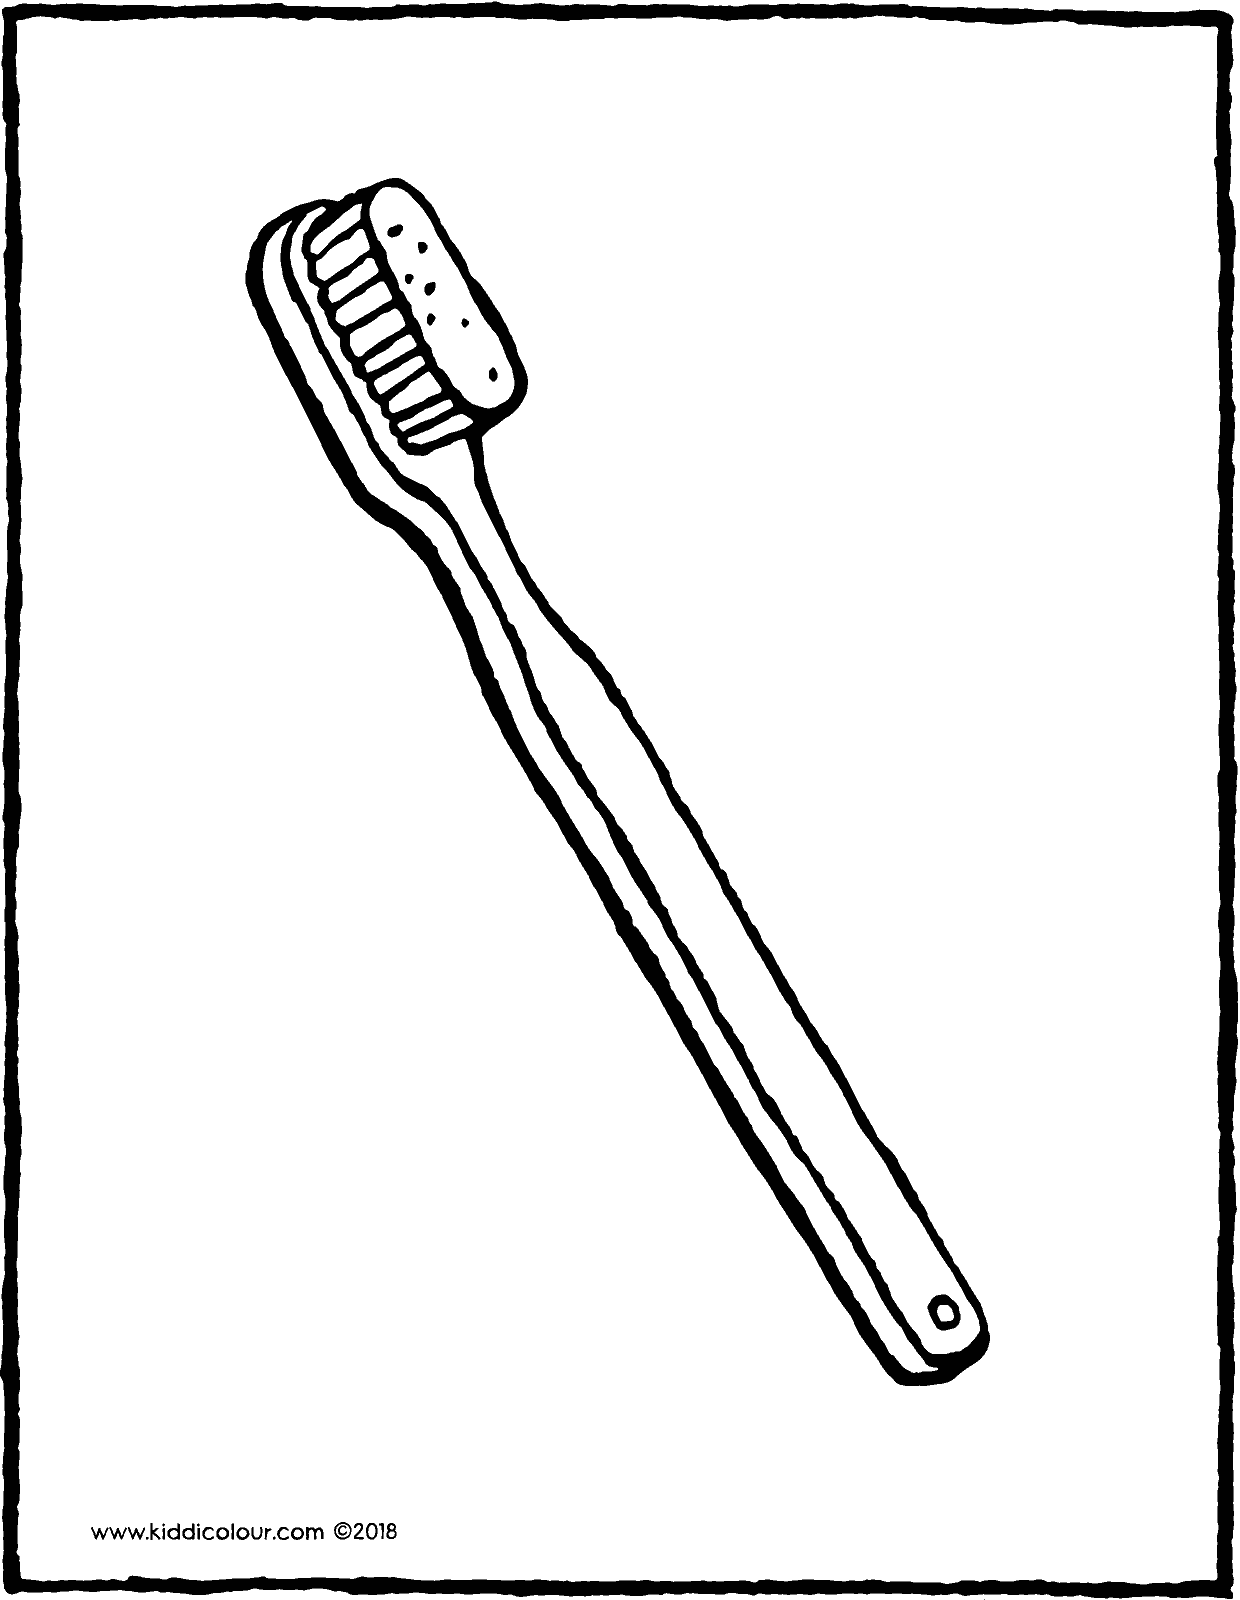 coloring-page-toothbrush-and-mouthwash-coloring-pages